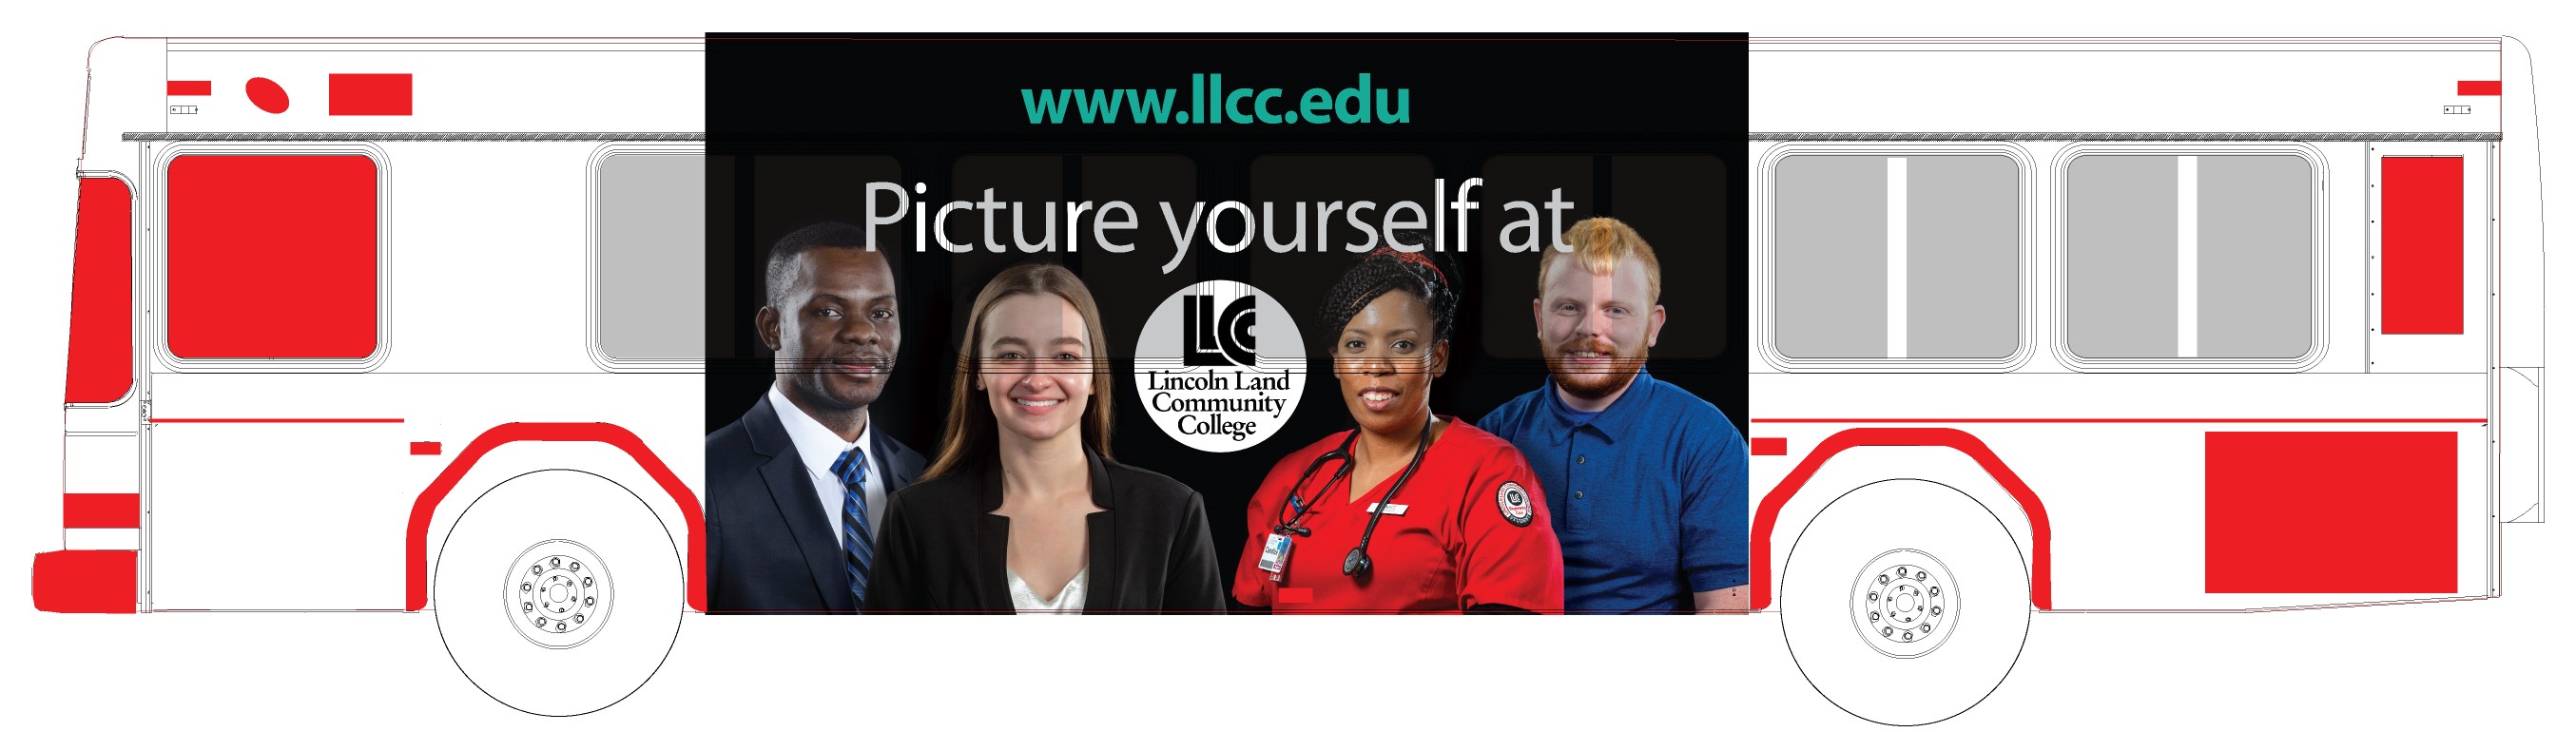 Ad on bus. www.llcc.edu Picture yourself at LLCC Lincoln Land Community College 